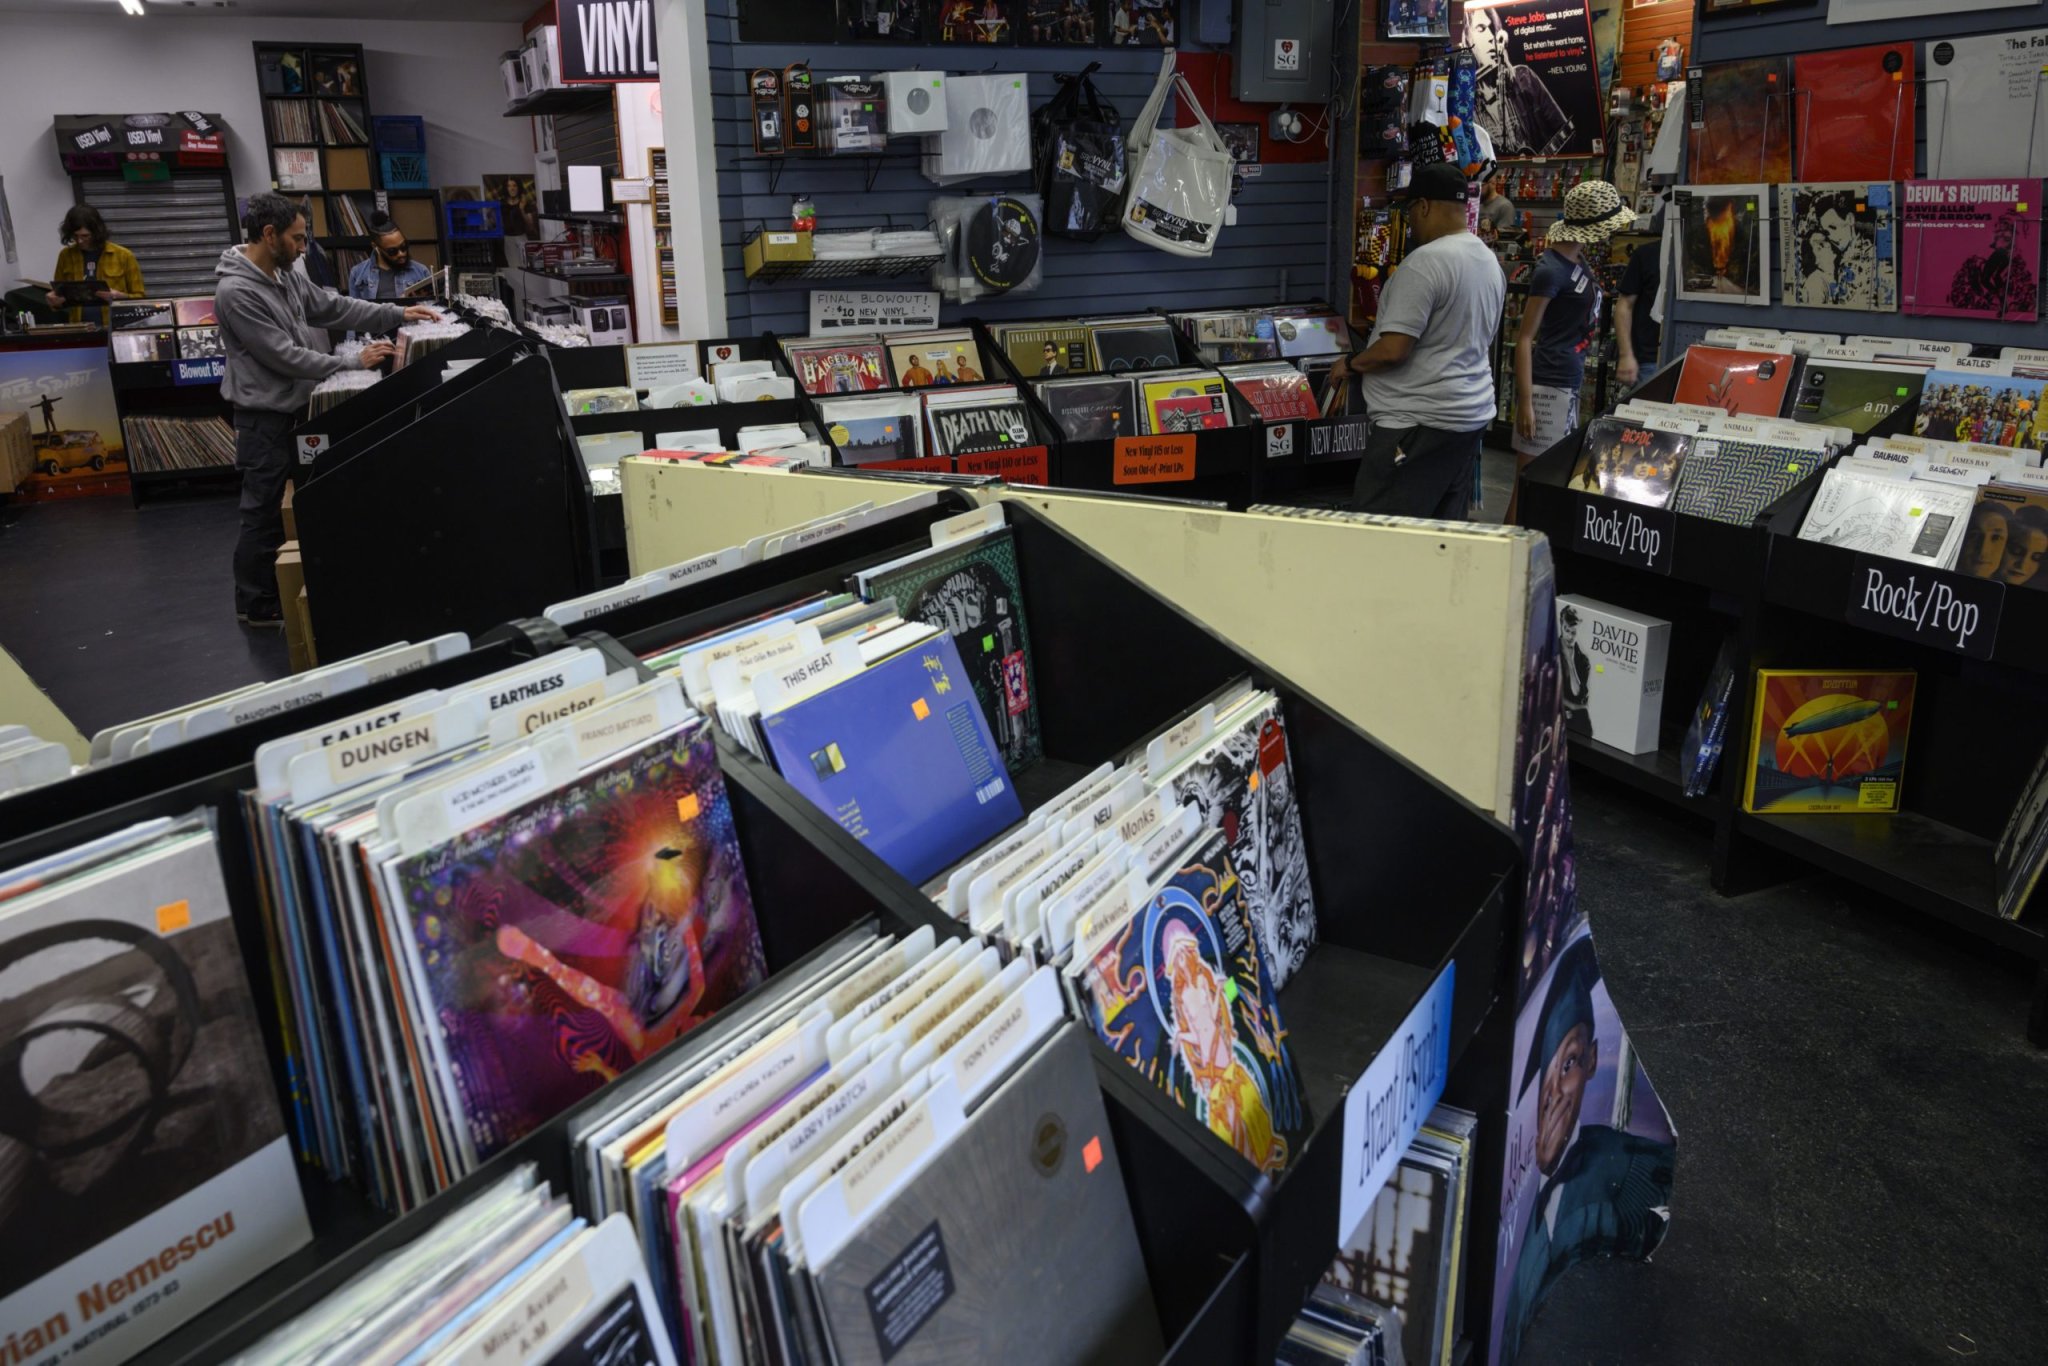 The 10 Greatest Record Stores in the U.S.